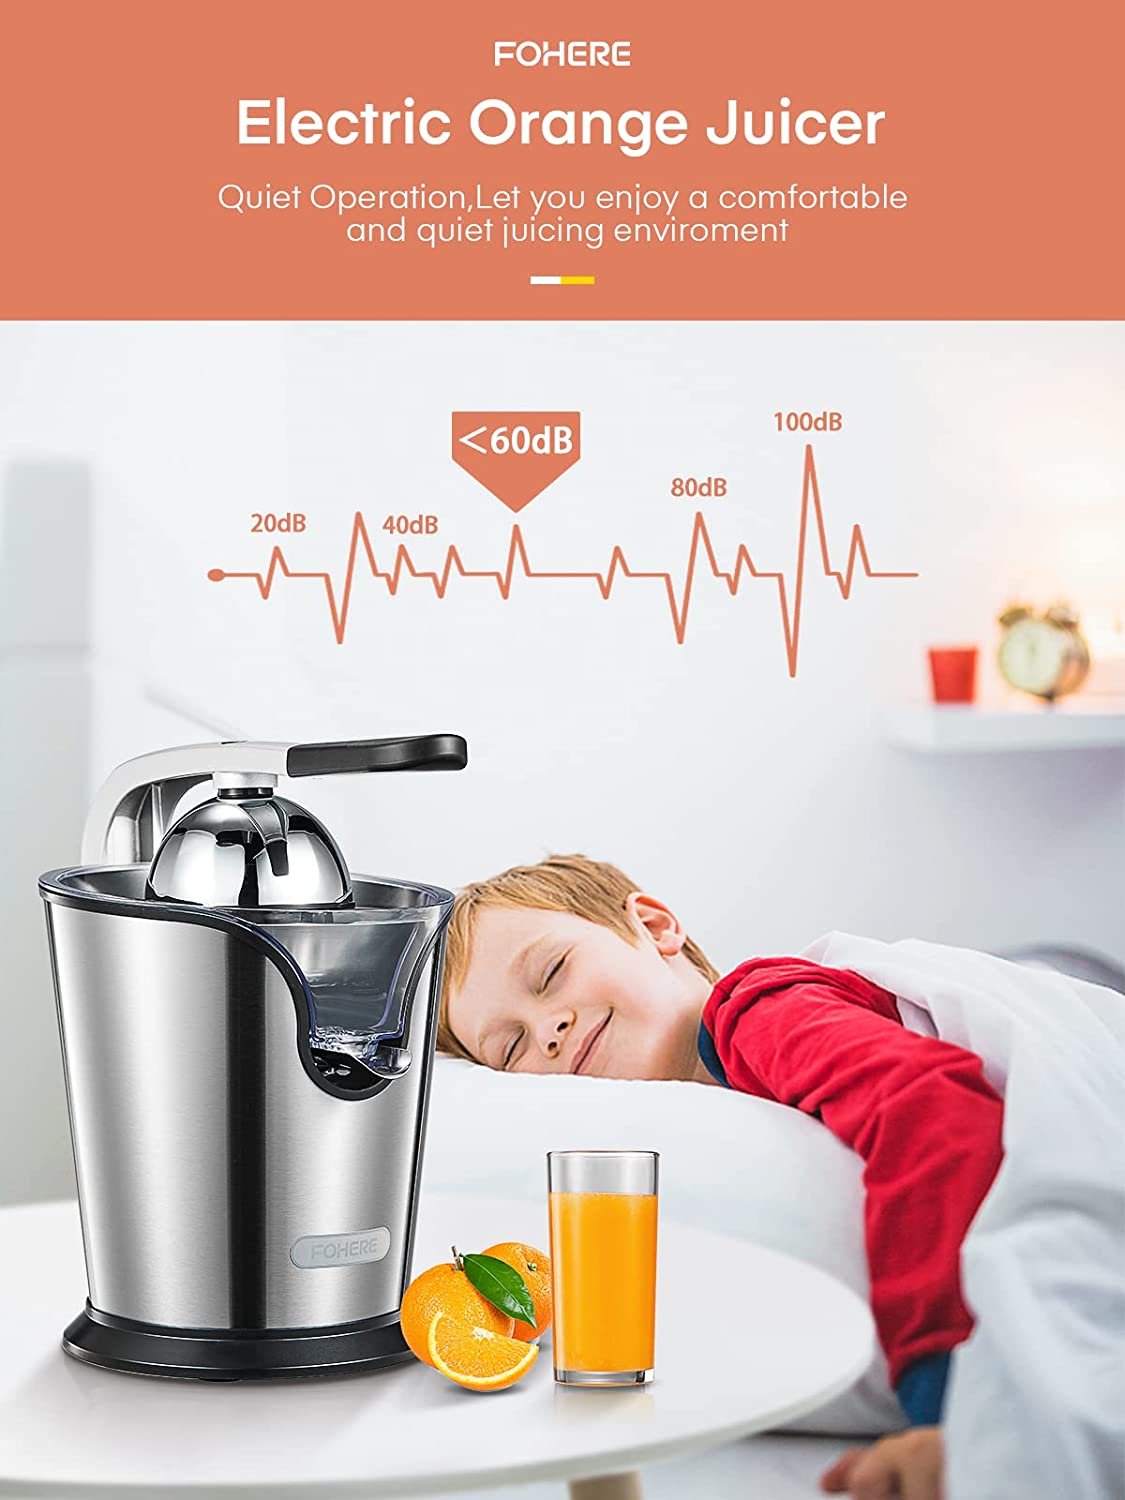 electric orange juicer, FOHERE Citrus Juicer Electric Orange Juicer Squeezer with Humanized Handle, Powerful 160W Silent Motor Stainless Steel BPA-Free, Two Size Cones for Grapefruits, Orange and Lemon, Silver